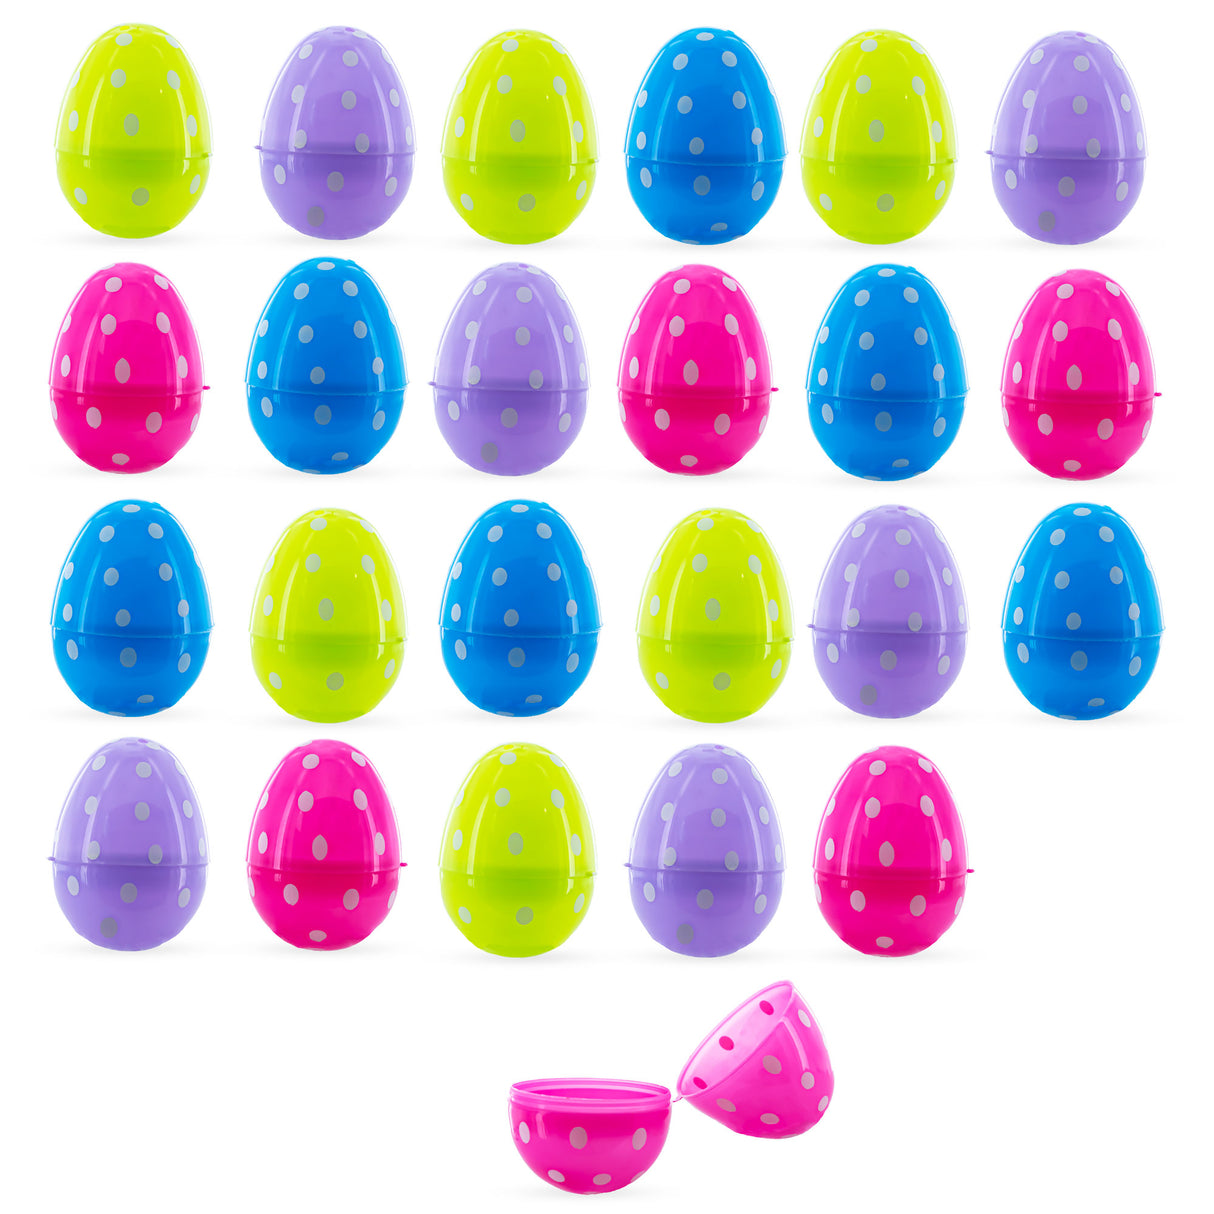 Polka Dot Parade: Set of 24 Colorful Dot Printed Fillable Plastic Easter Eggs 2.25 Inches in Multi color, Oval shape